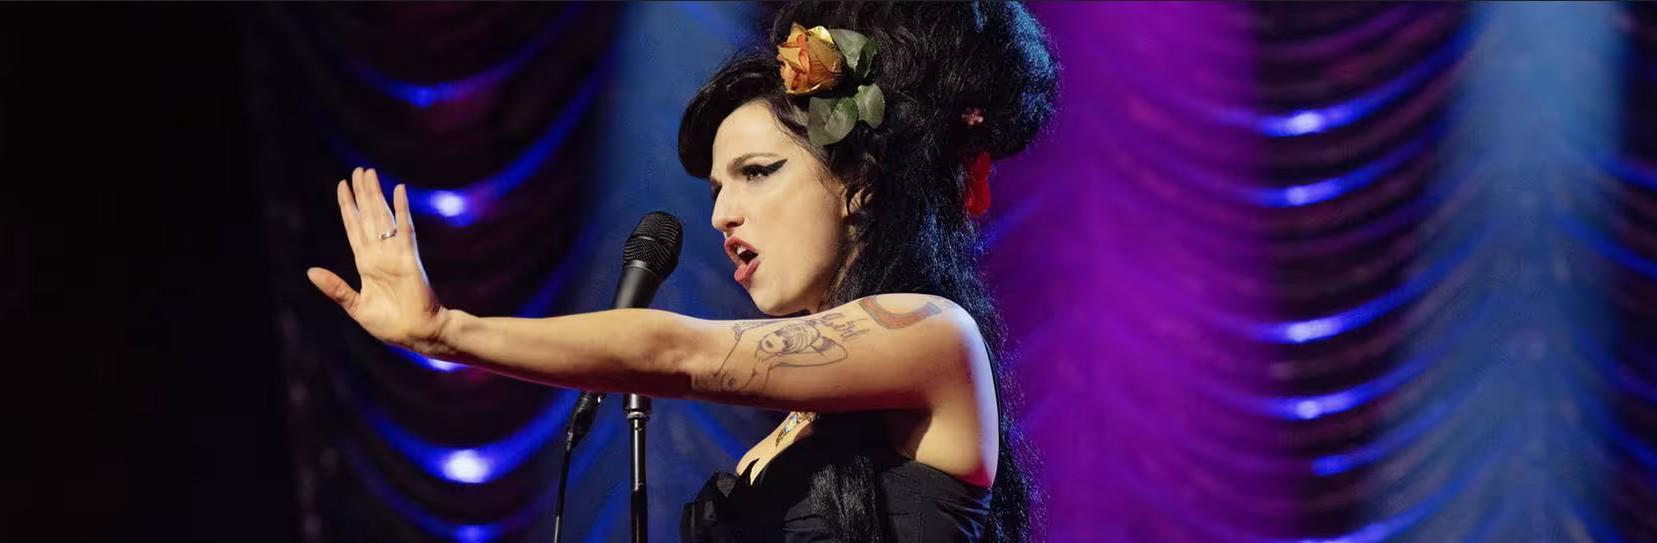 1 amy winehouse film kritik back to black QUER